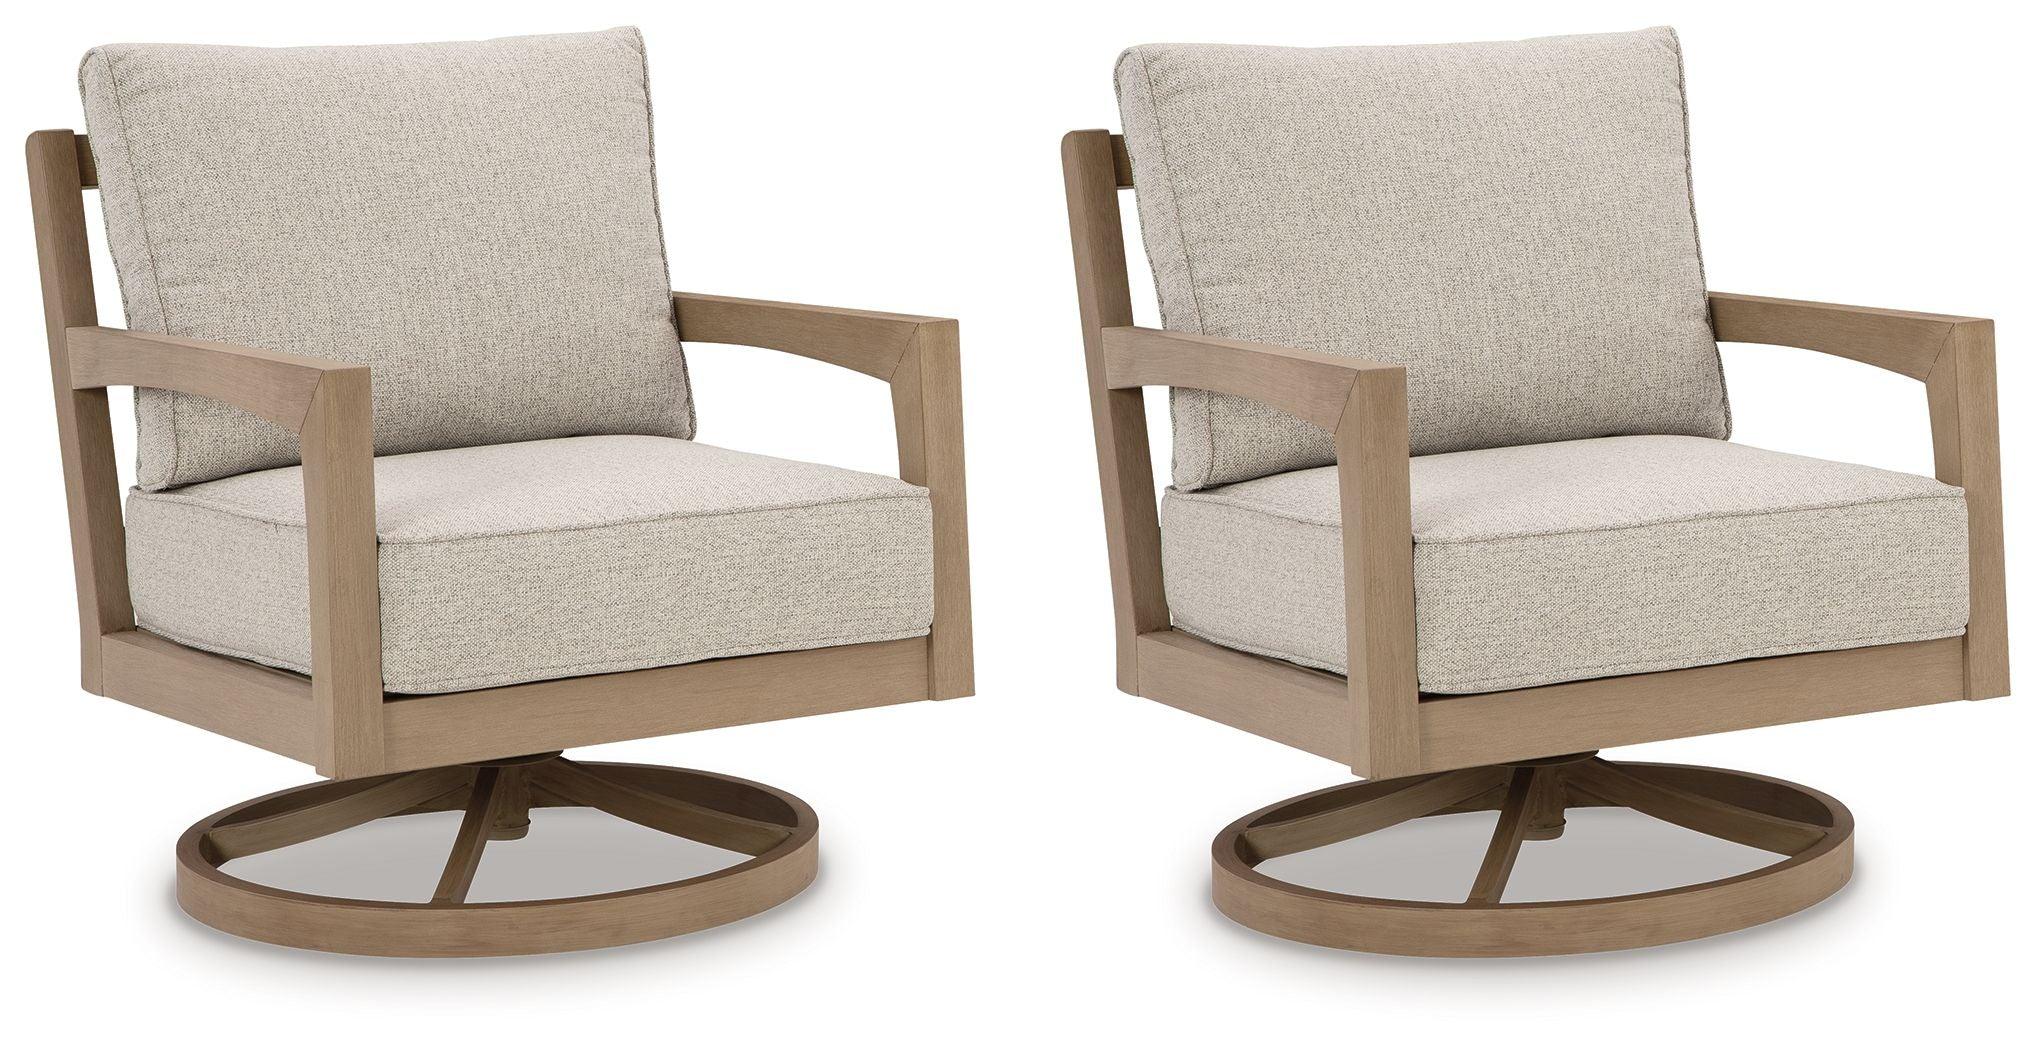 Signature Design by Ashley® - Hallow Creek - Driftwood - Swivel Lounge With Cushion - 5th Avenue Furniture